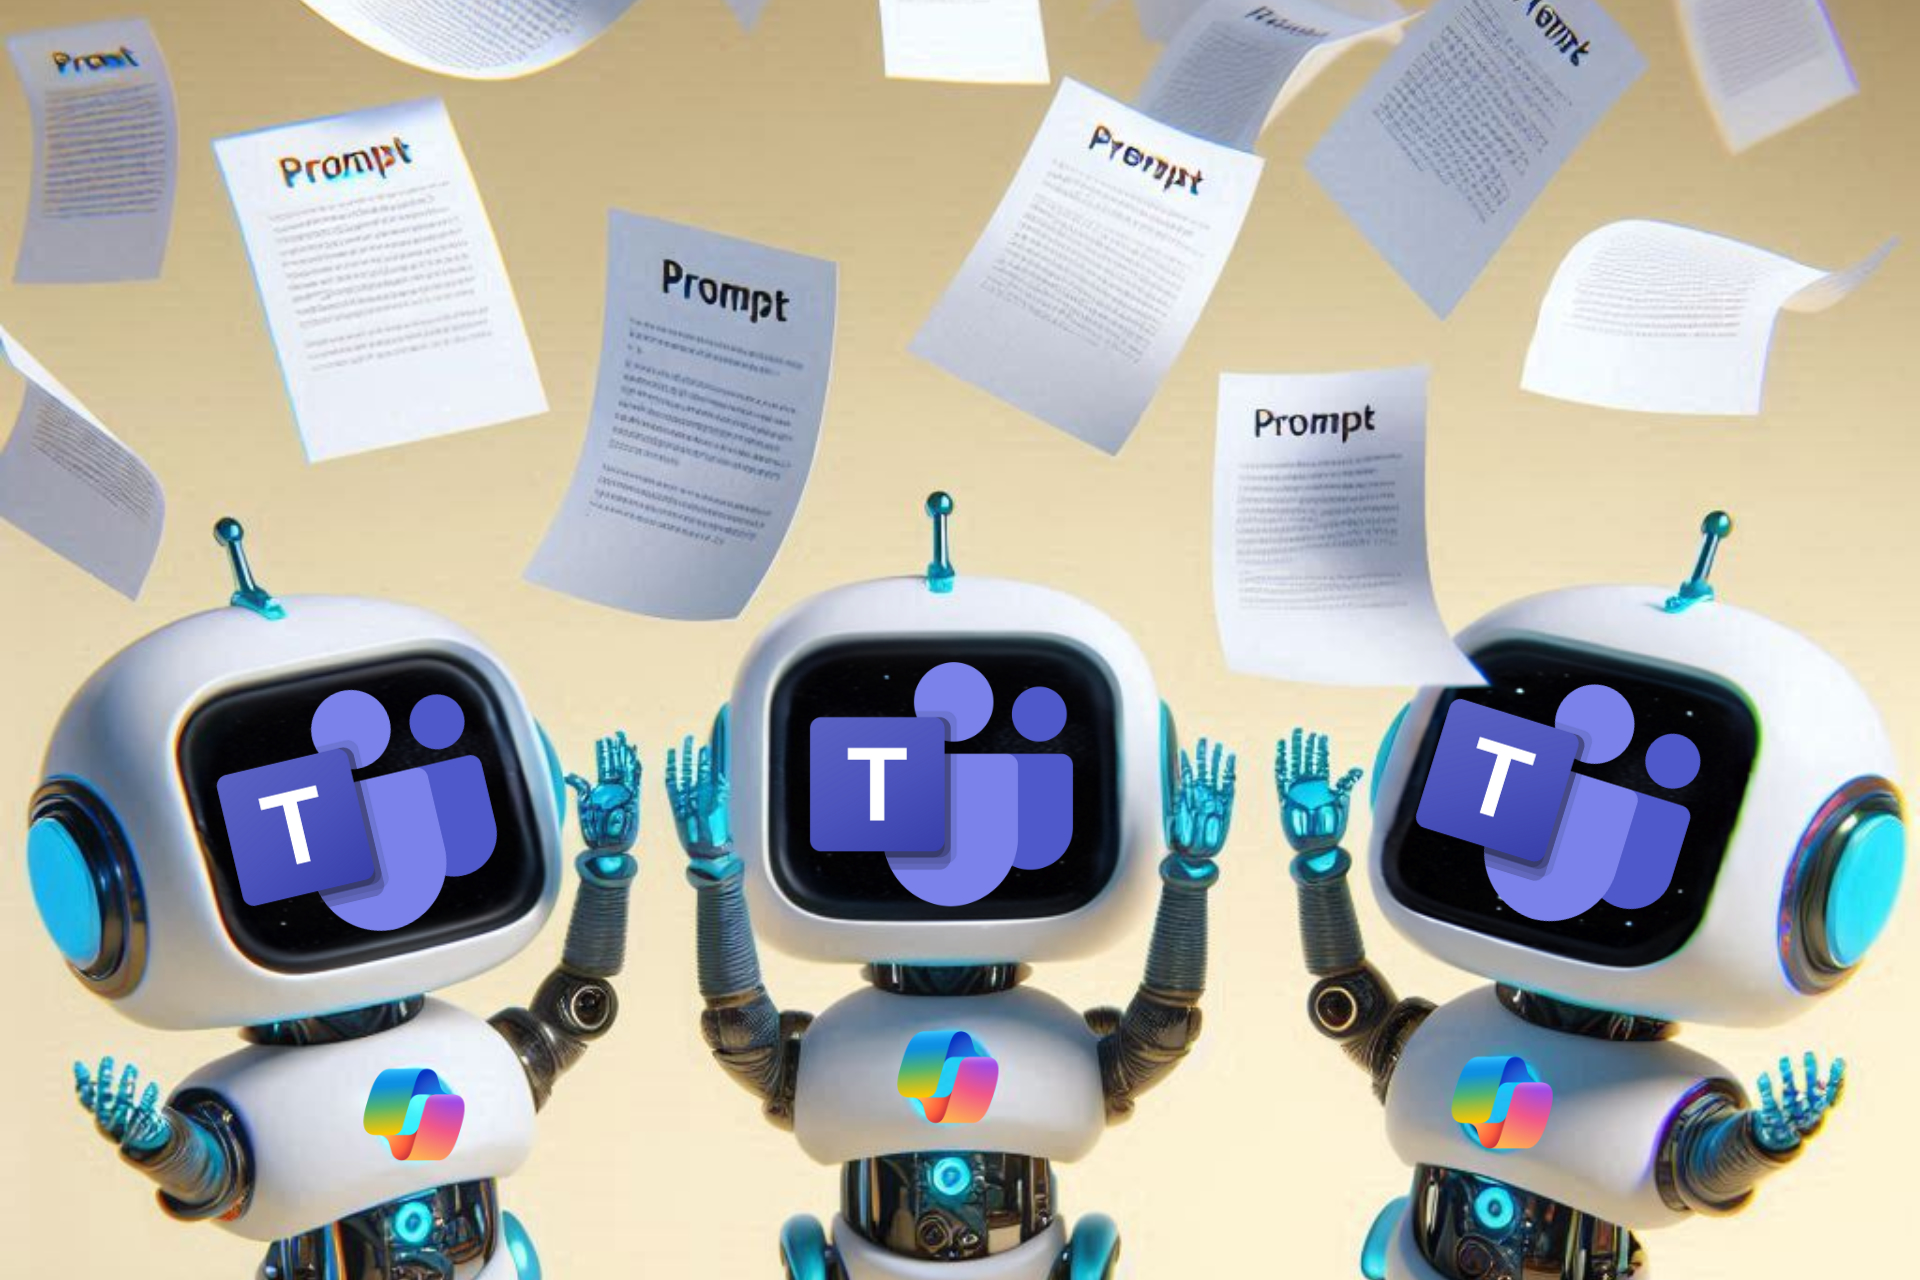 An AI generated image of Copilot robots with Microsoft Teams masks throwing prompts